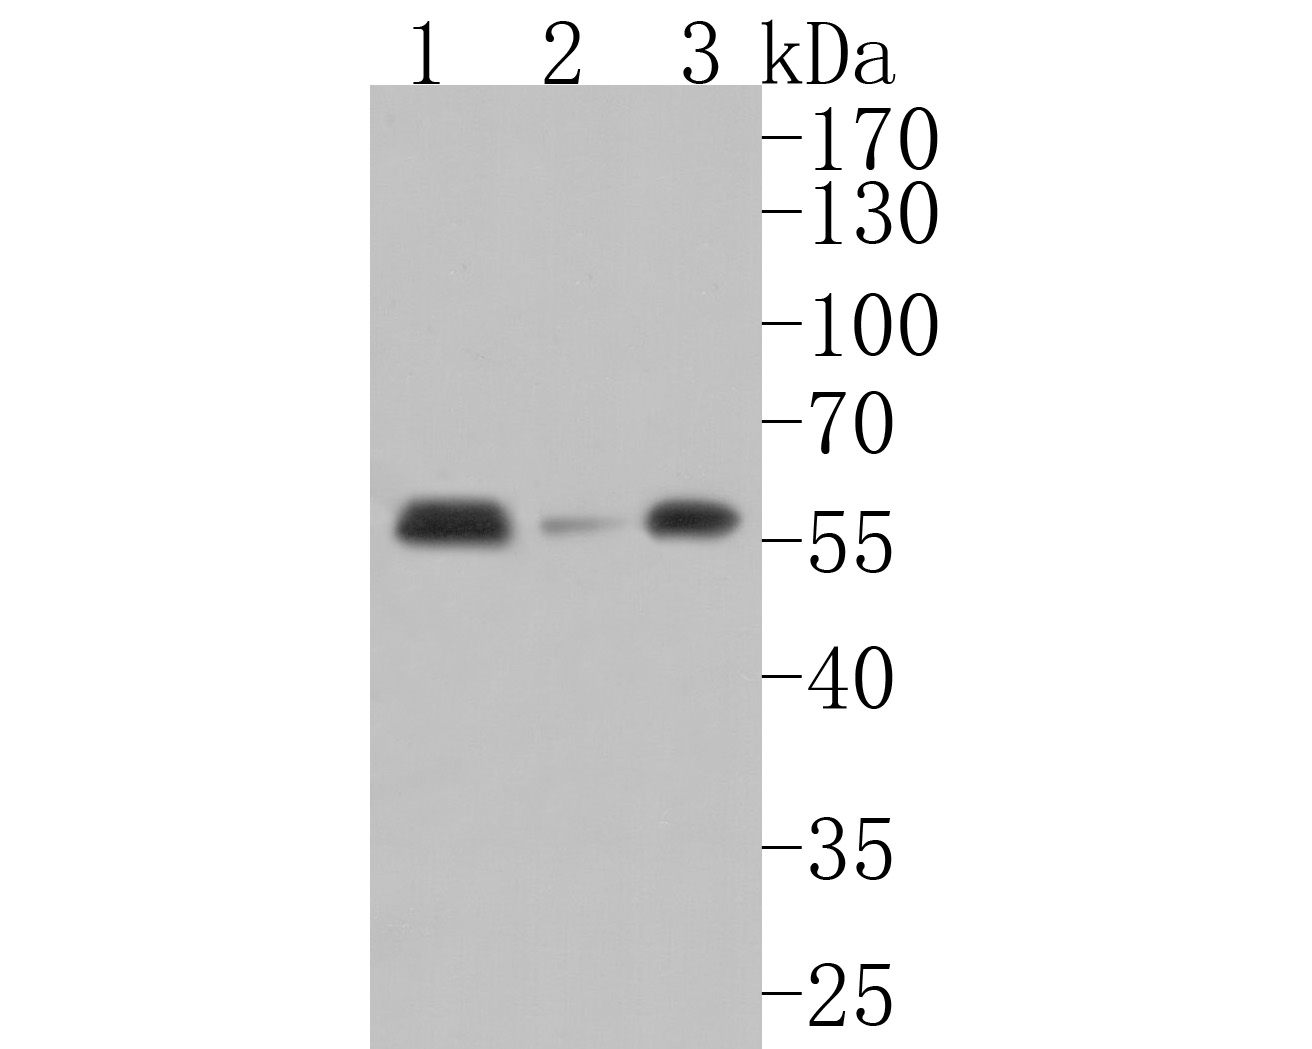 Western blot analysis of AKT2 on different lysates. Proteins were transferred to a PVDF membrane and blocked with 5% BSA in PBS for 1 hour at room temperature. The primary antibody (HA500091, 1/500) was used in 5% BSA at room temperature for 2 hours. Goat Anti-Rabbit IgG - HRP Secondary Antibody (HA1001) at 1:5,000 dilution was used for 1 hour at room temperature.<br />
Positive control: <br />
Lane 1: 293 cell lysate<br />
Lane 2: Rat brain tissue lysate<br />
Lane 3: Mouse pancreas tissue lysate